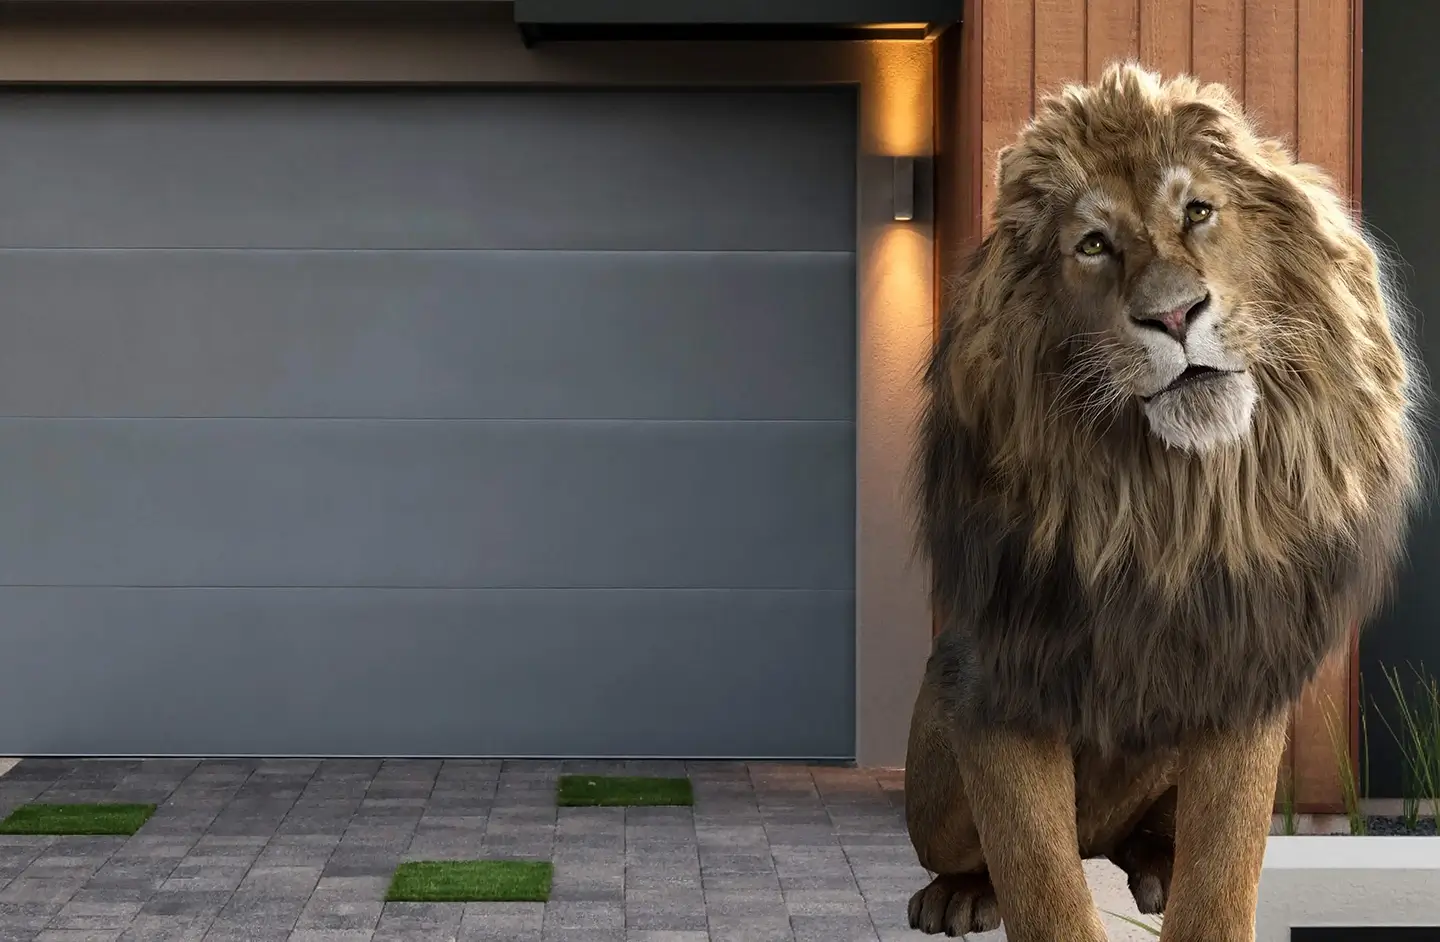 Lion standing in front of a house and sectional garage door